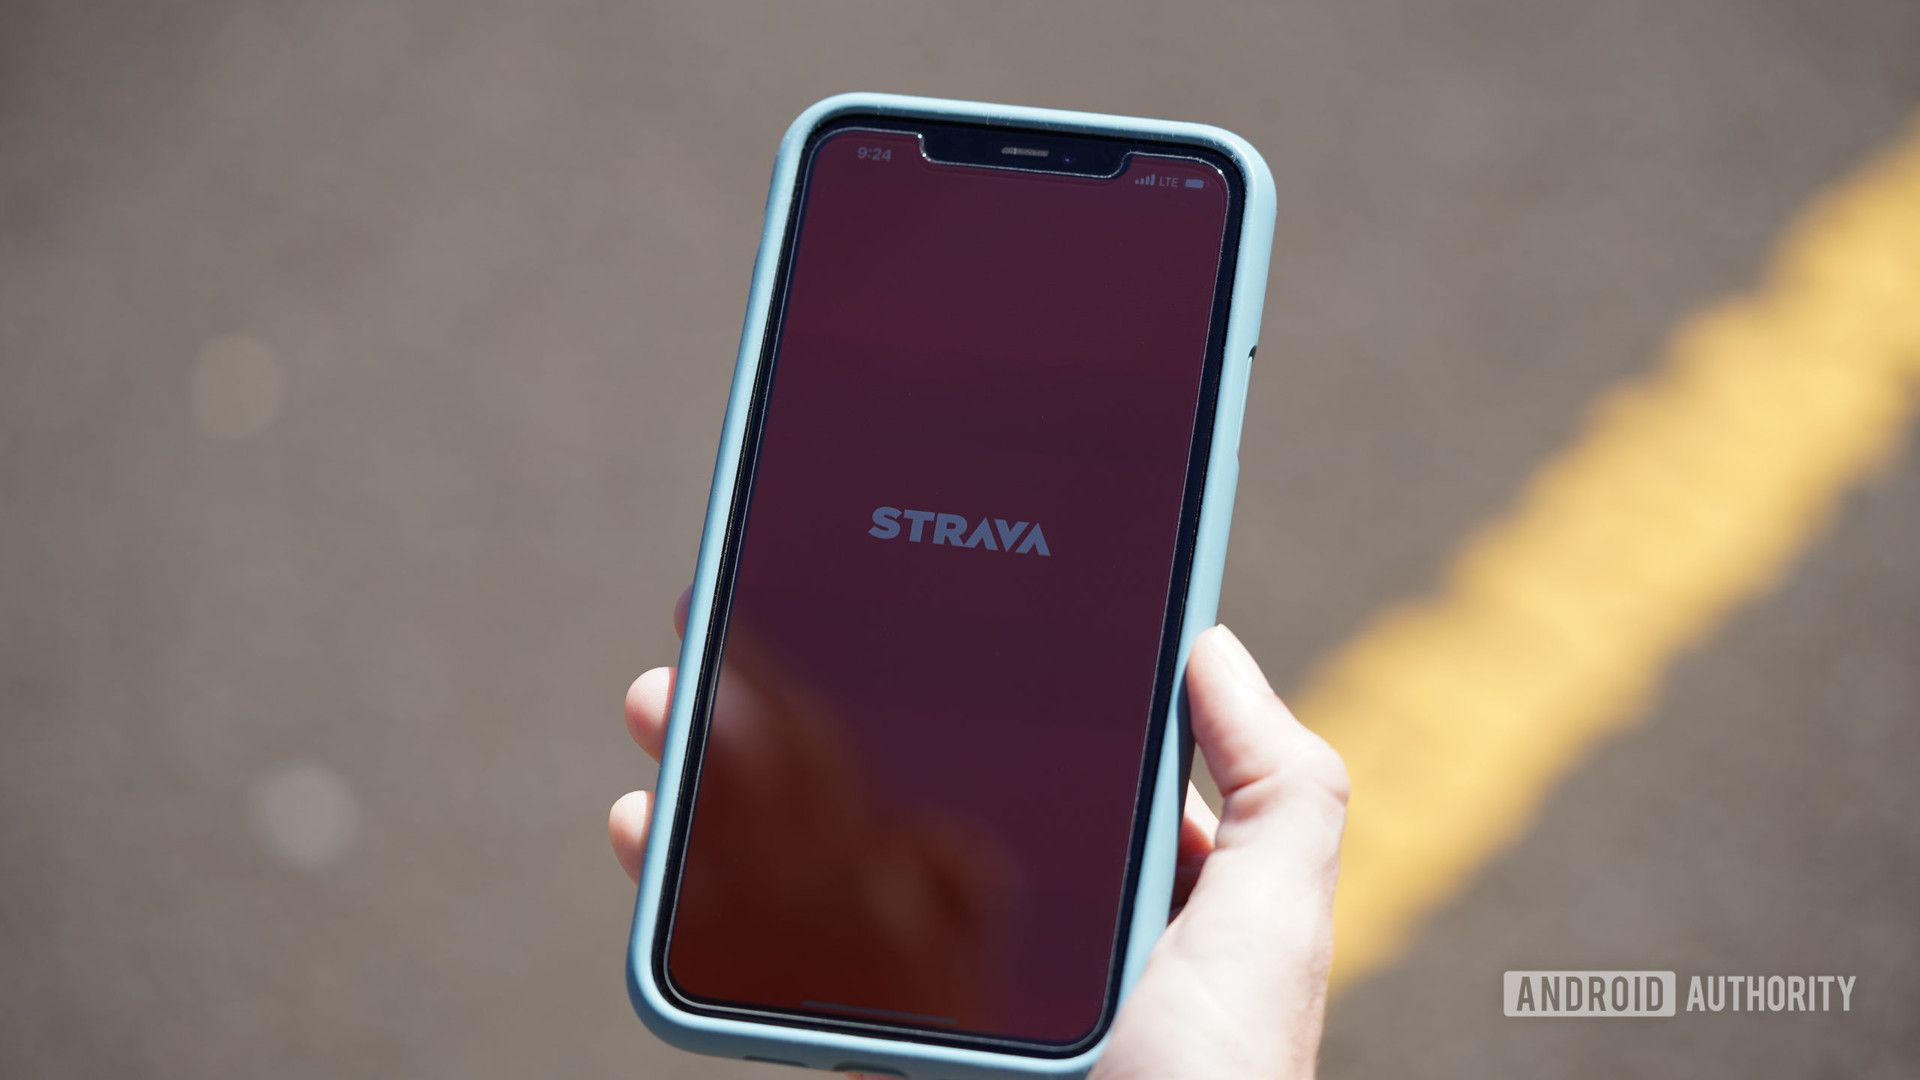 A female runner opens the Strava mobile app on their iPhone 11.